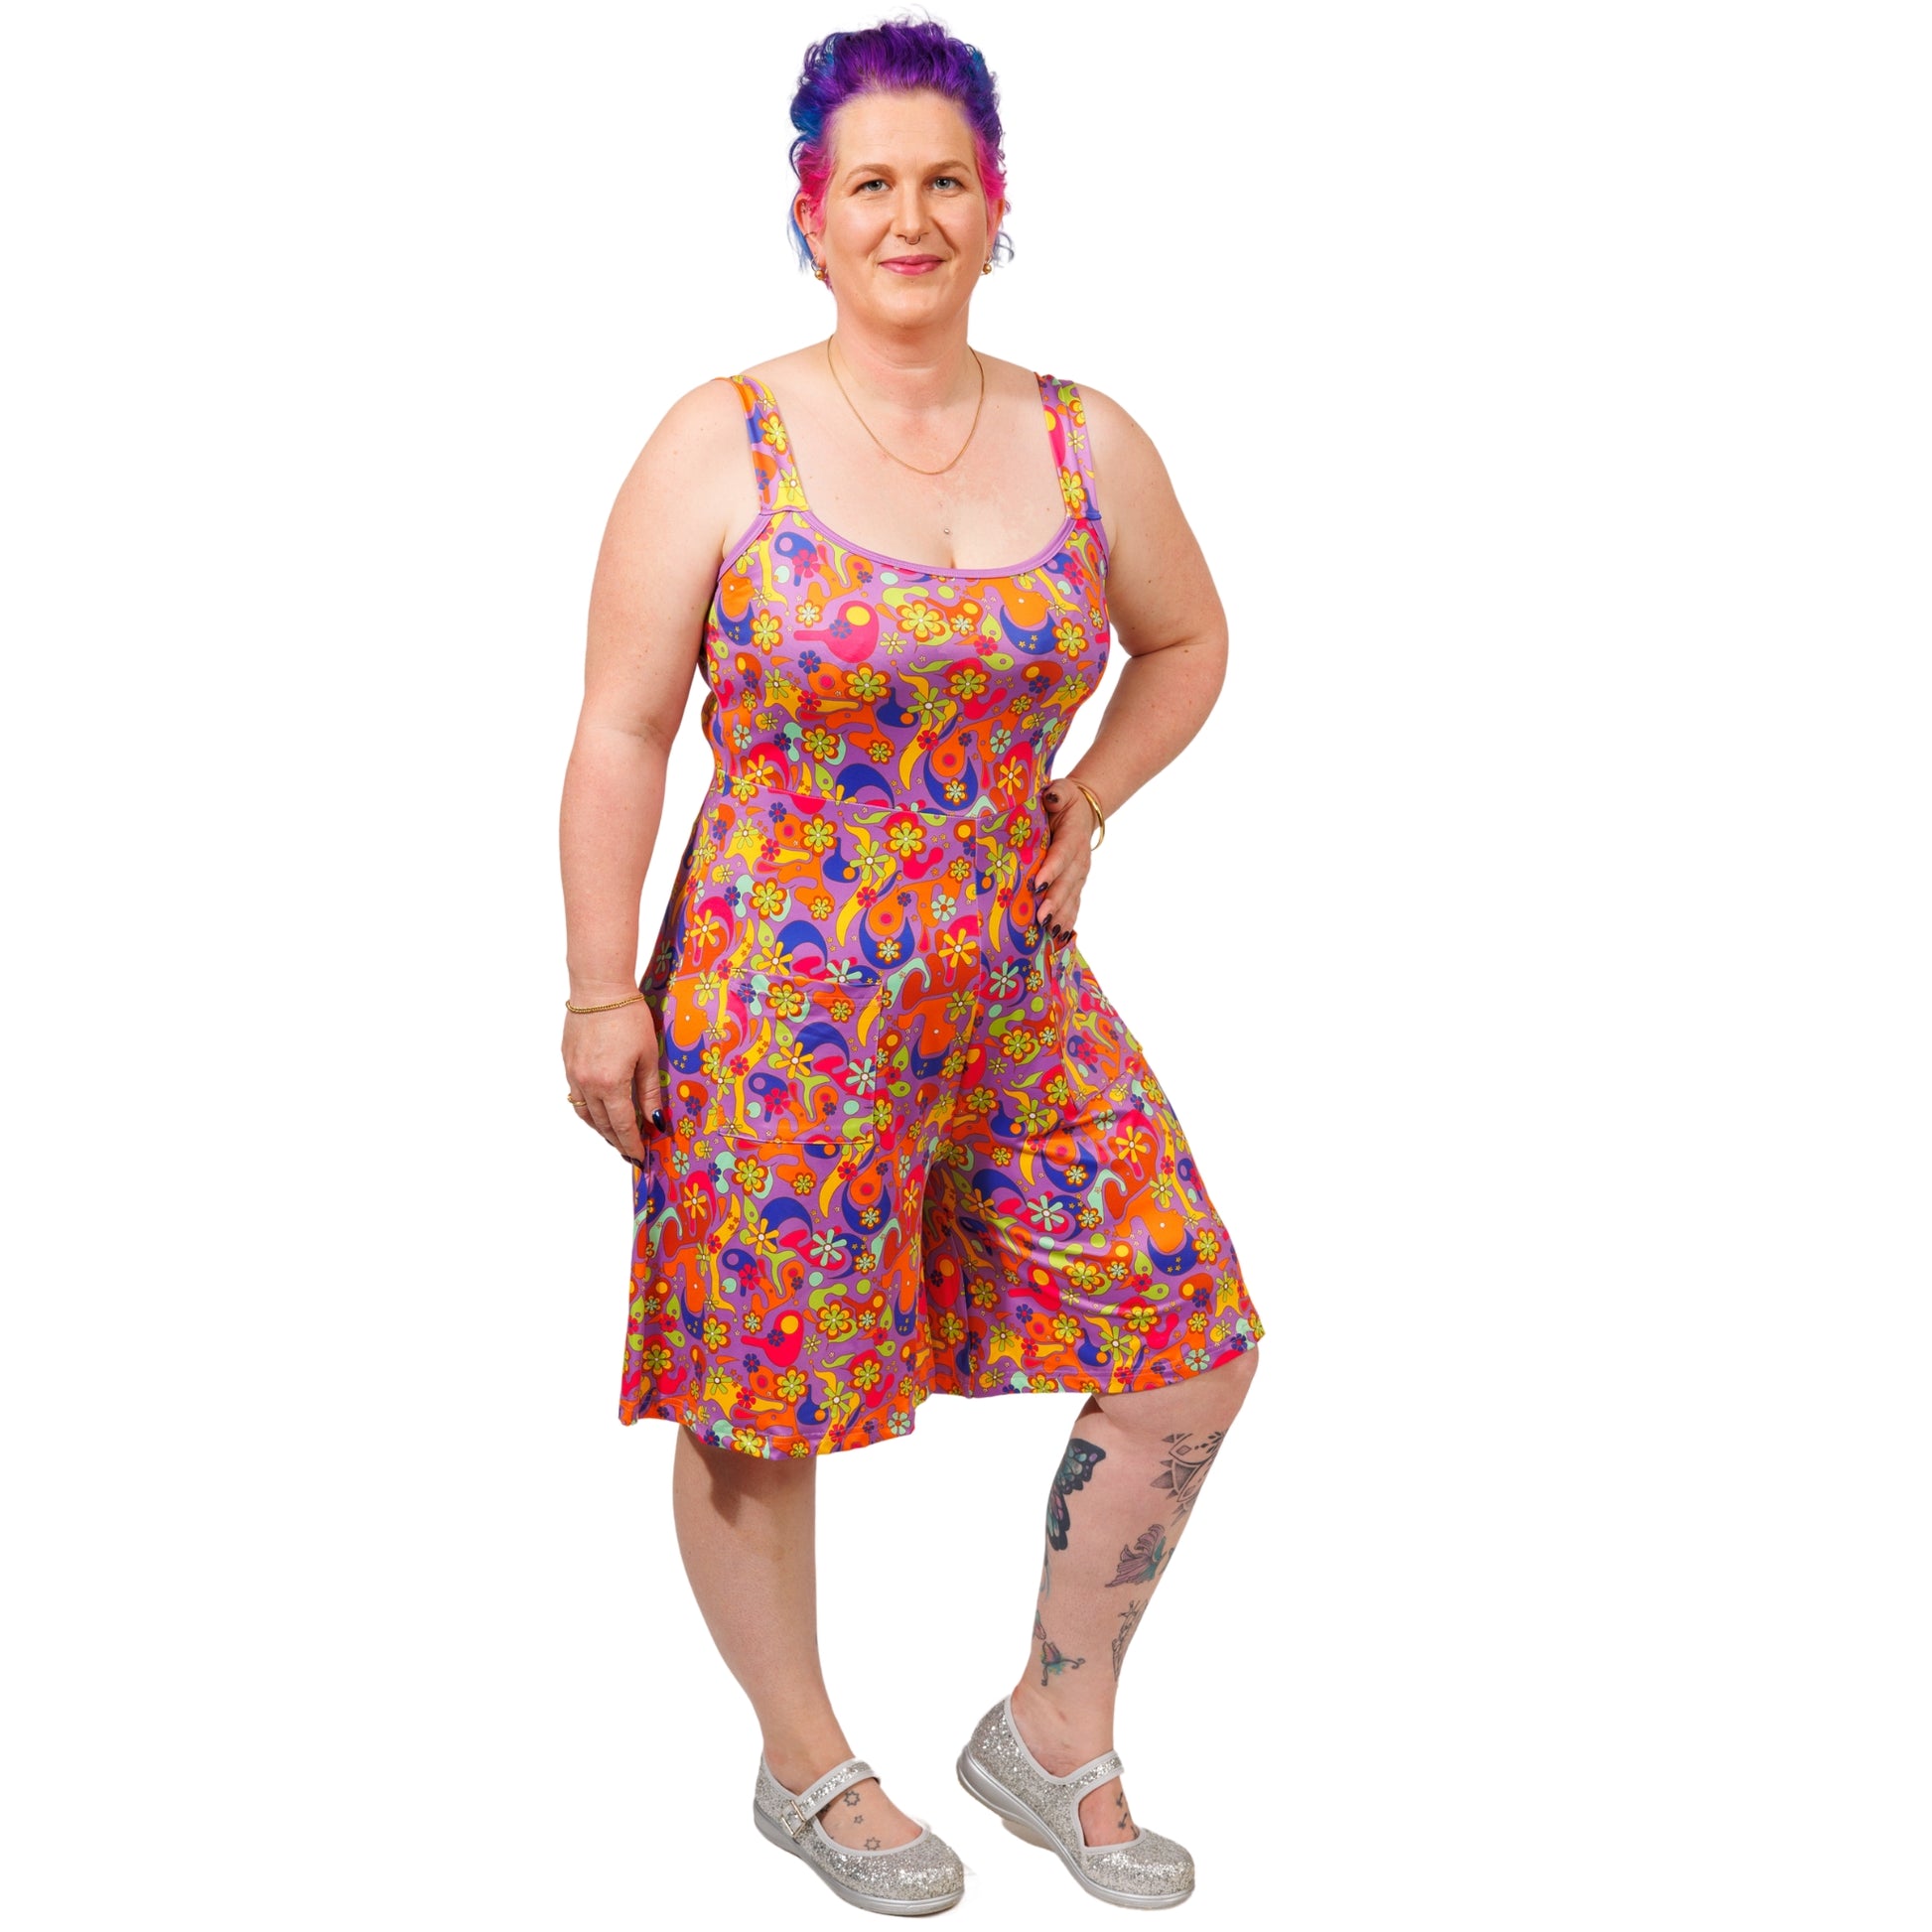 Flower Power Romper by RainbowsAndFairies.com.au (Psychedelic - Woodstock - Floral - Playsuit - Shorts - Kitsch - Rockabilly) - SKU: CL_ROMPR_FLOPO_ORG - Pic-02